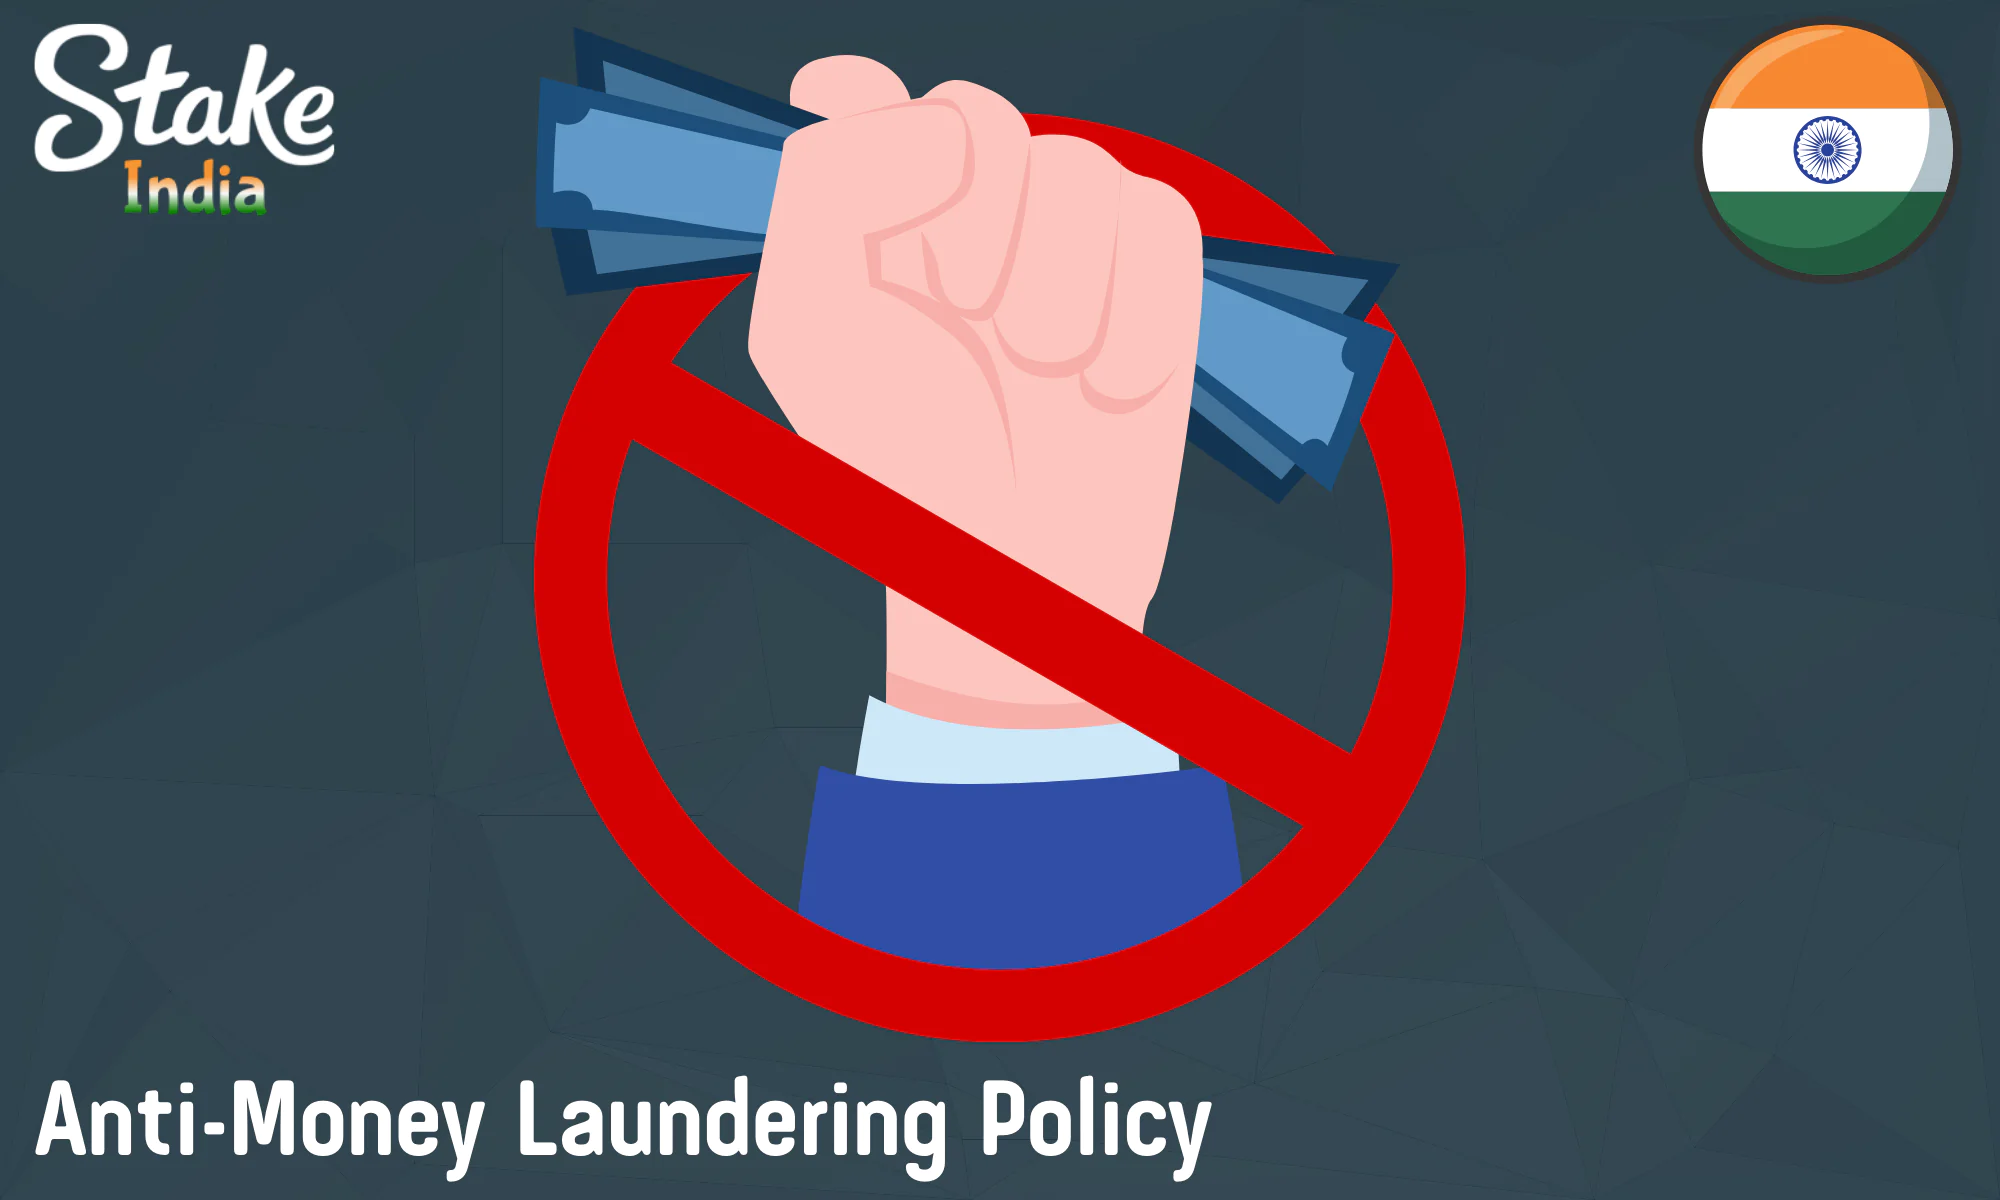 Stake's anti-money laundering policy